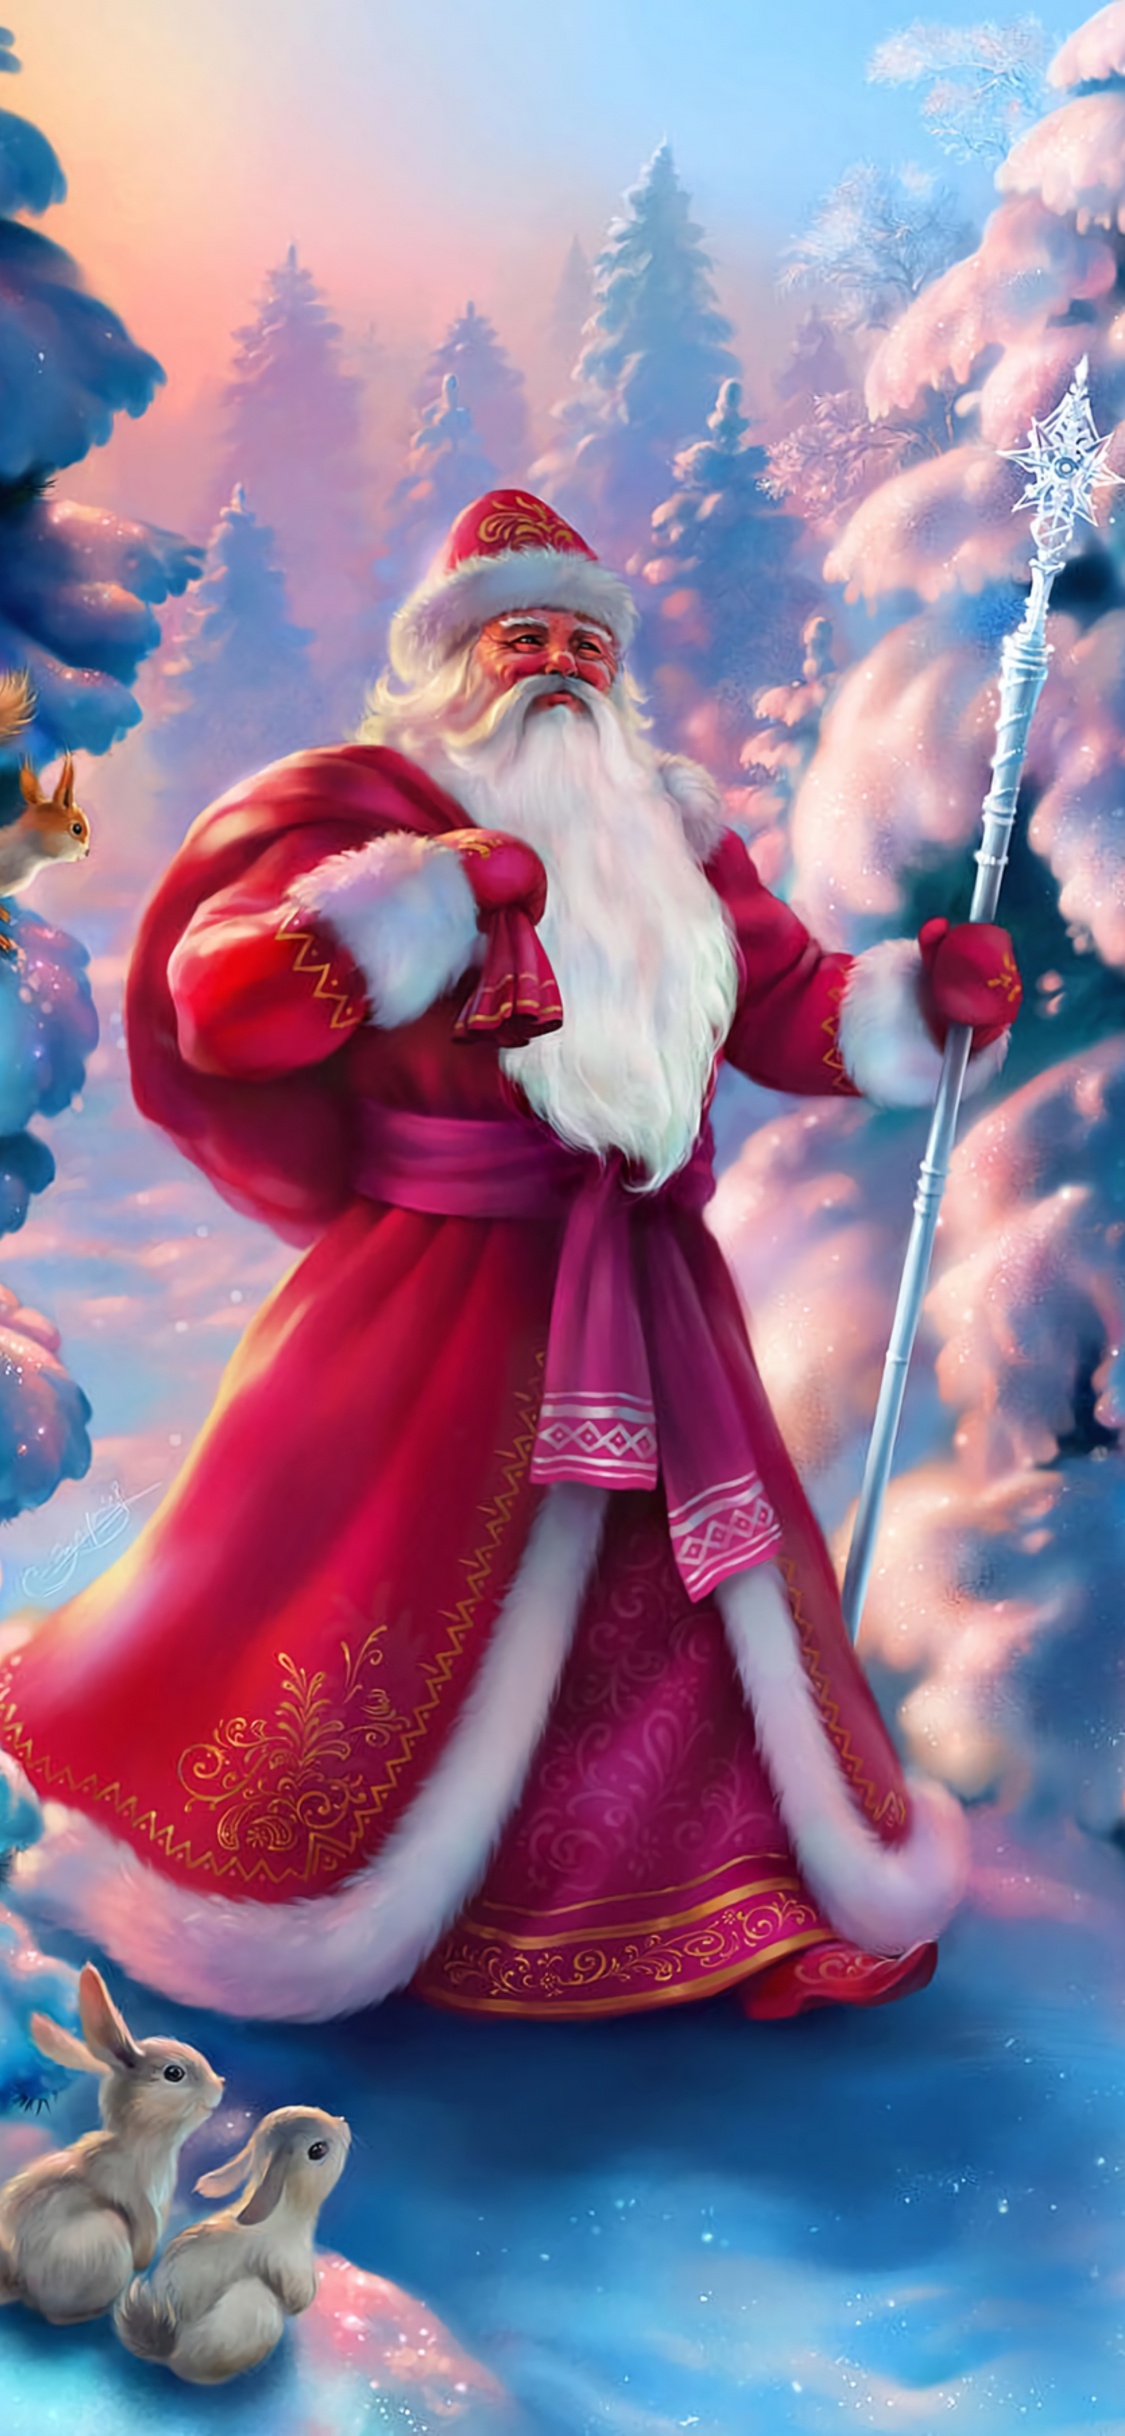 Santa Claus, Ded Moroz, Christmas Day, Christmas, Animation. Wallpaper in 1125x2436 Resolution